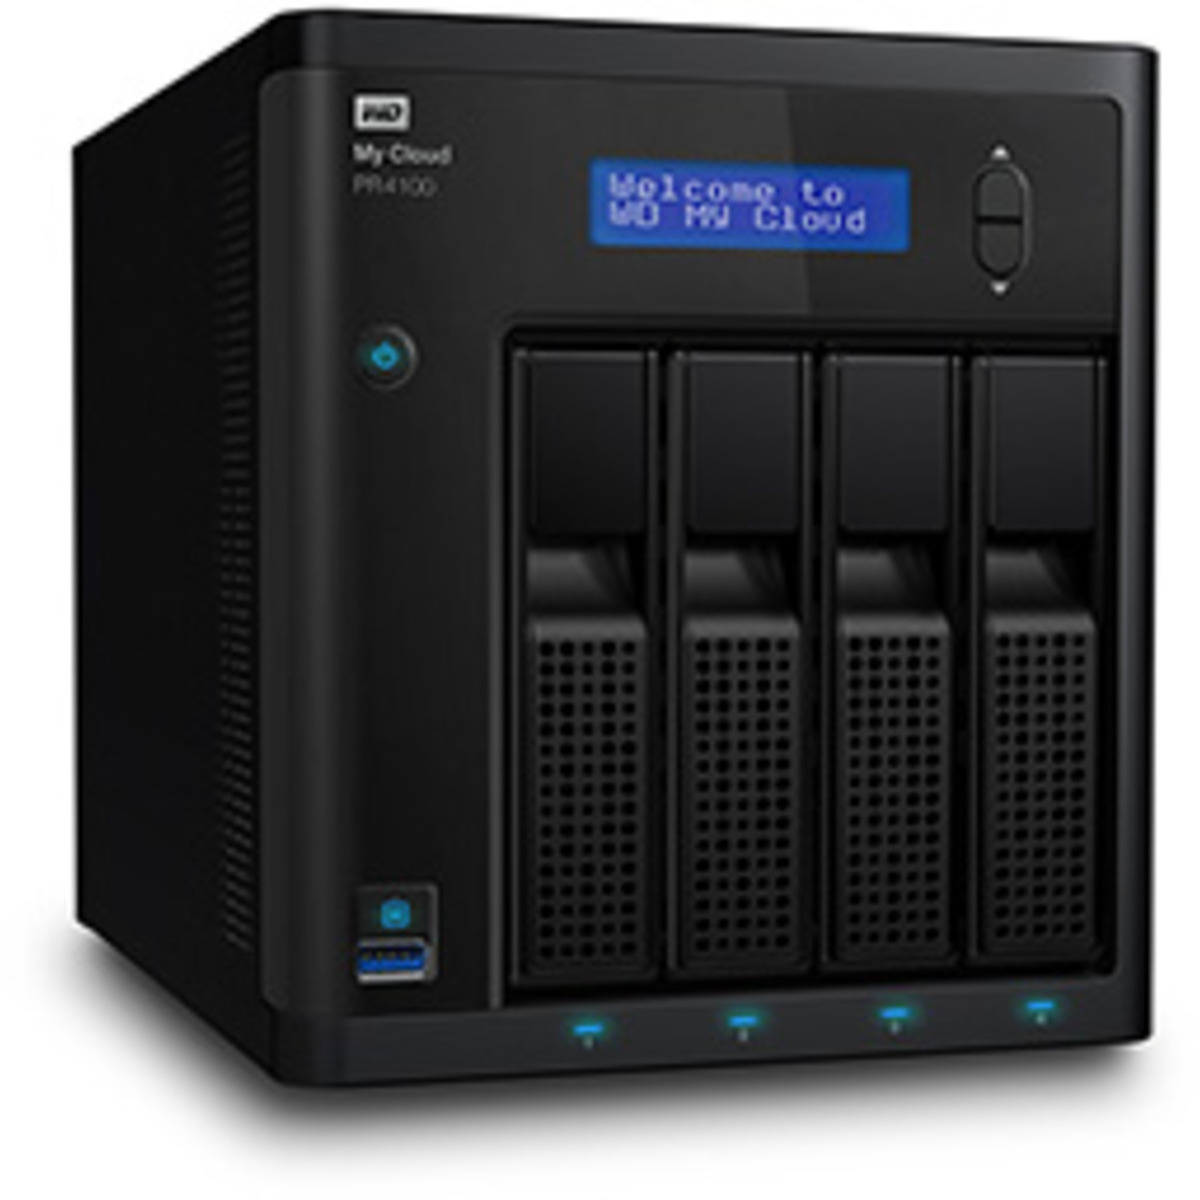 Western Digital My Cloud Pro PR4100 32tb 4-Bay Desktop Multimedia / Power User / Business NAS - Network Attached Storage Device 4x8tb Western Digital Red Plus WD80EFPX 3.5 7200rpm SATA 6Gb/s HDD NAS Class Drives Installed - Burn-In Tested My Cloud Pro PR4100